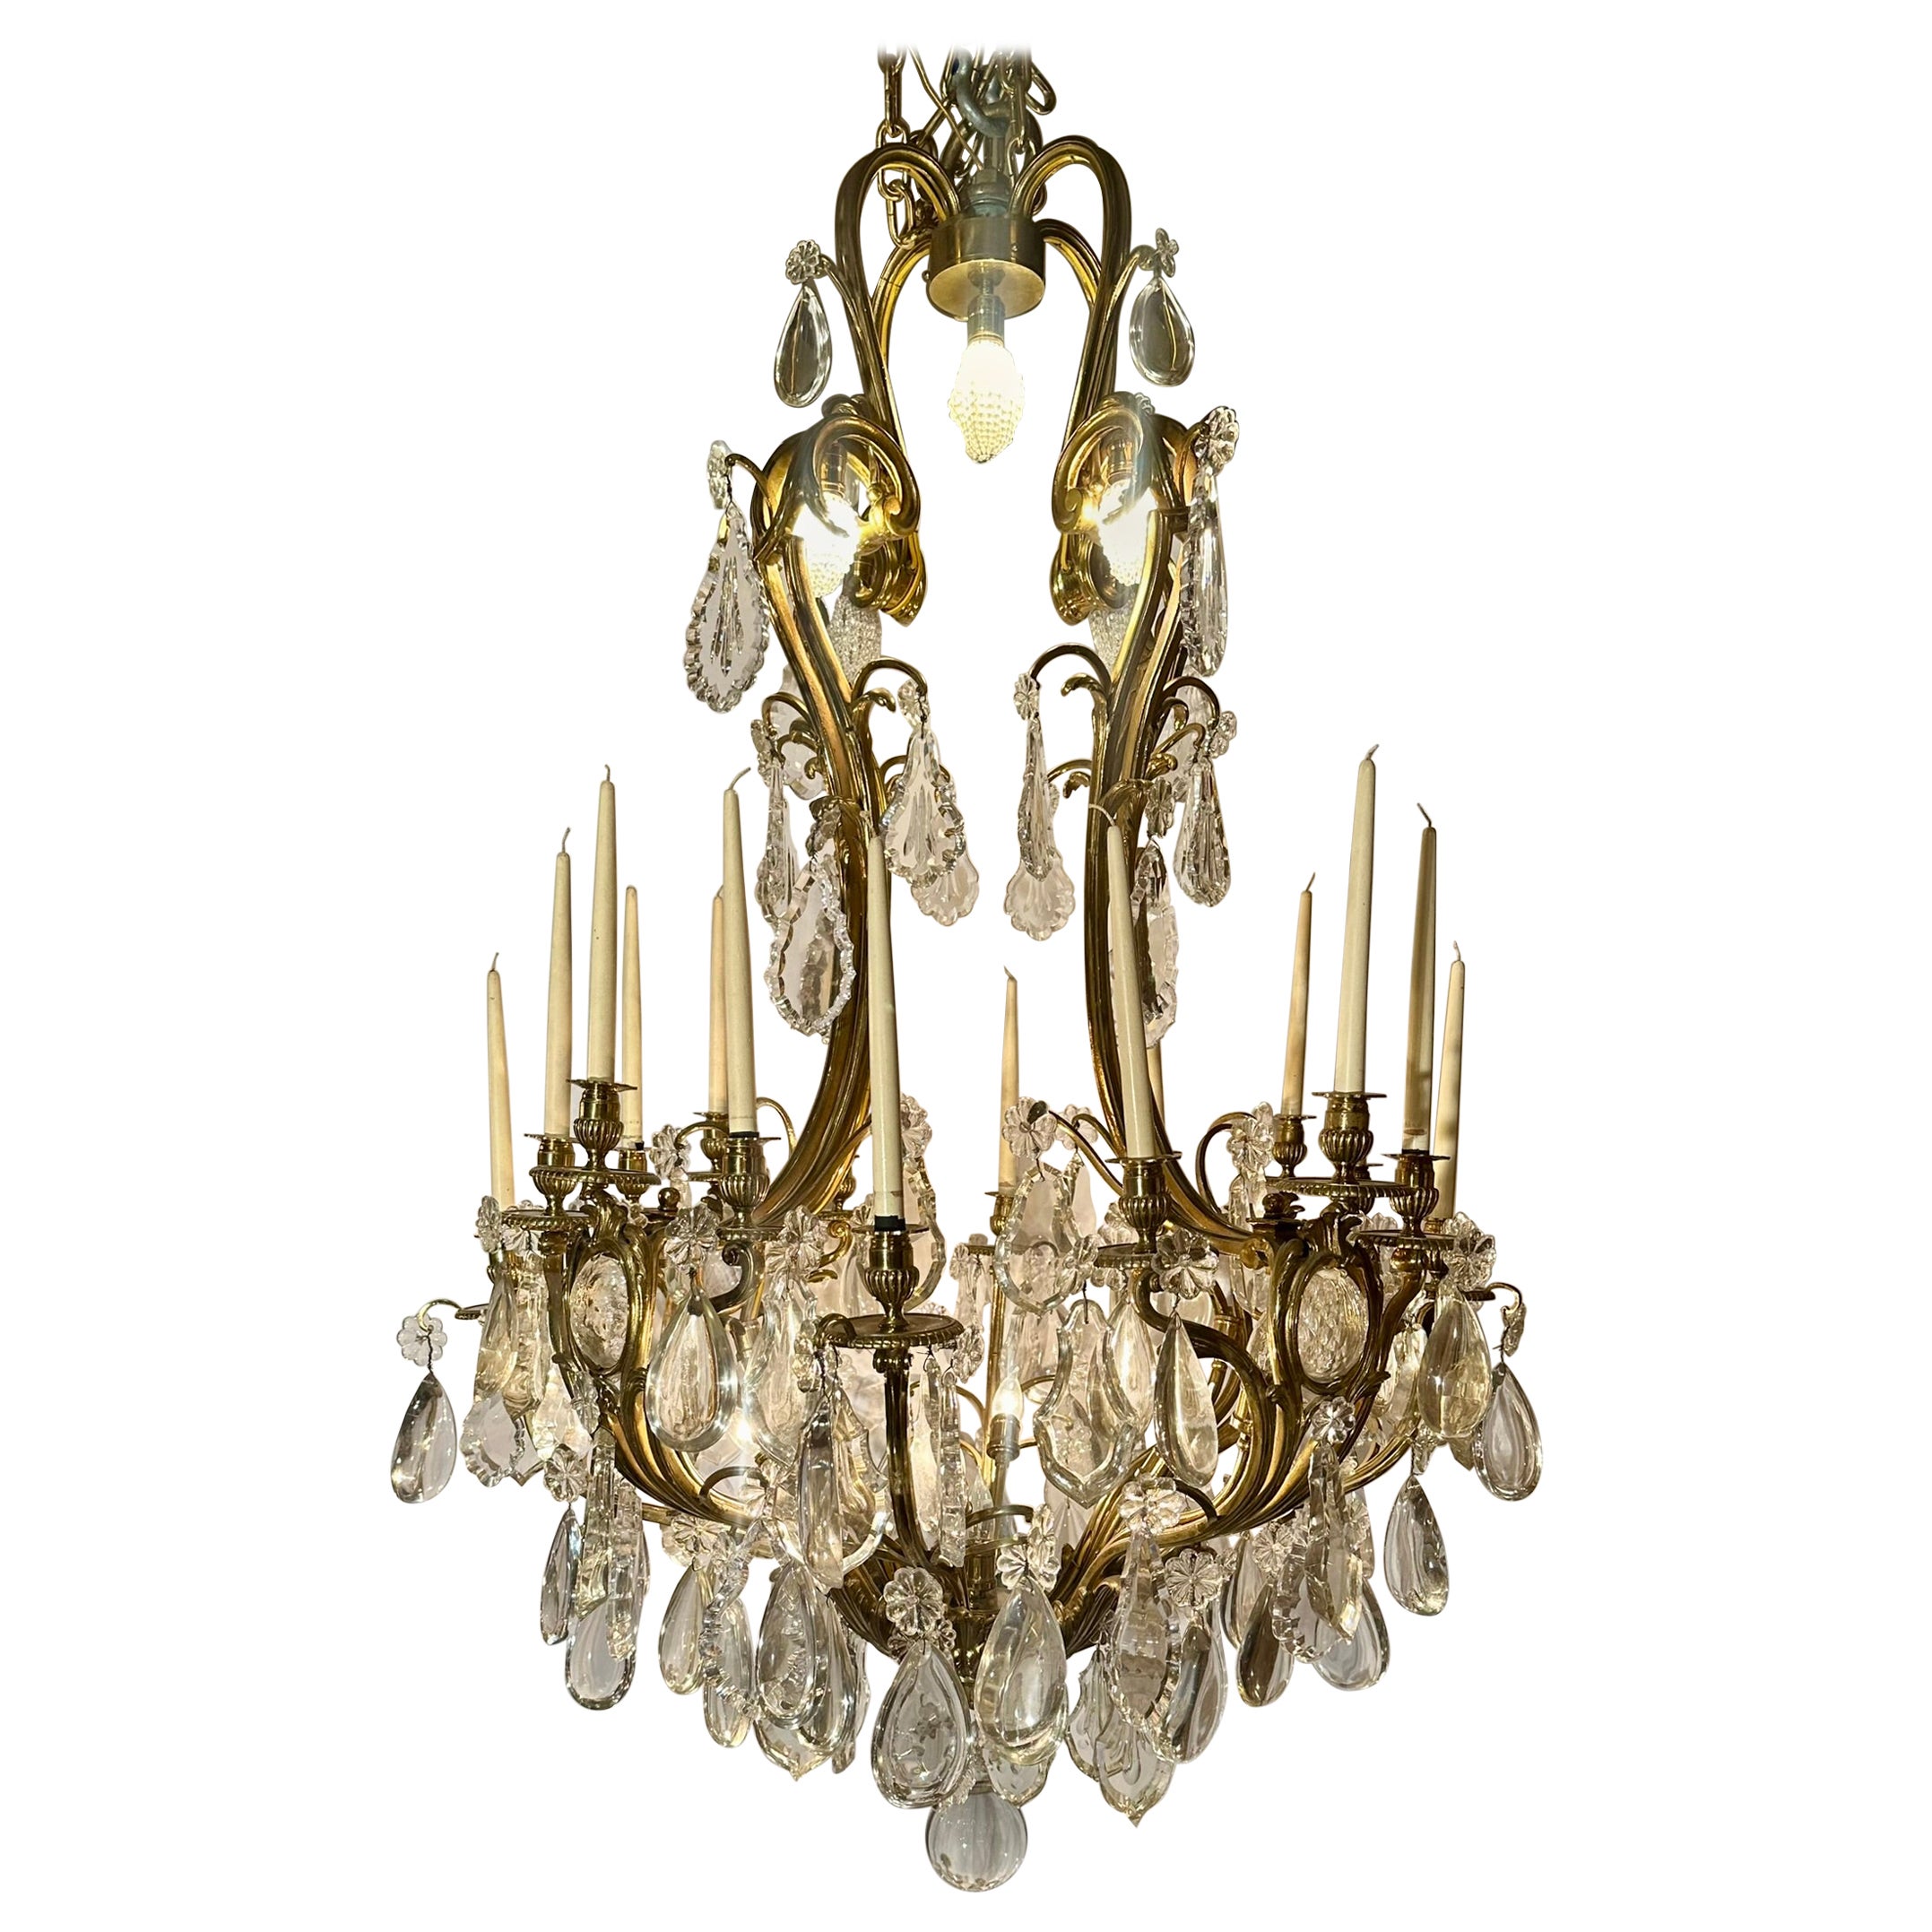 Antique French Baccarat Crystal and Gold Bronze Chandelier, Circa 1890.